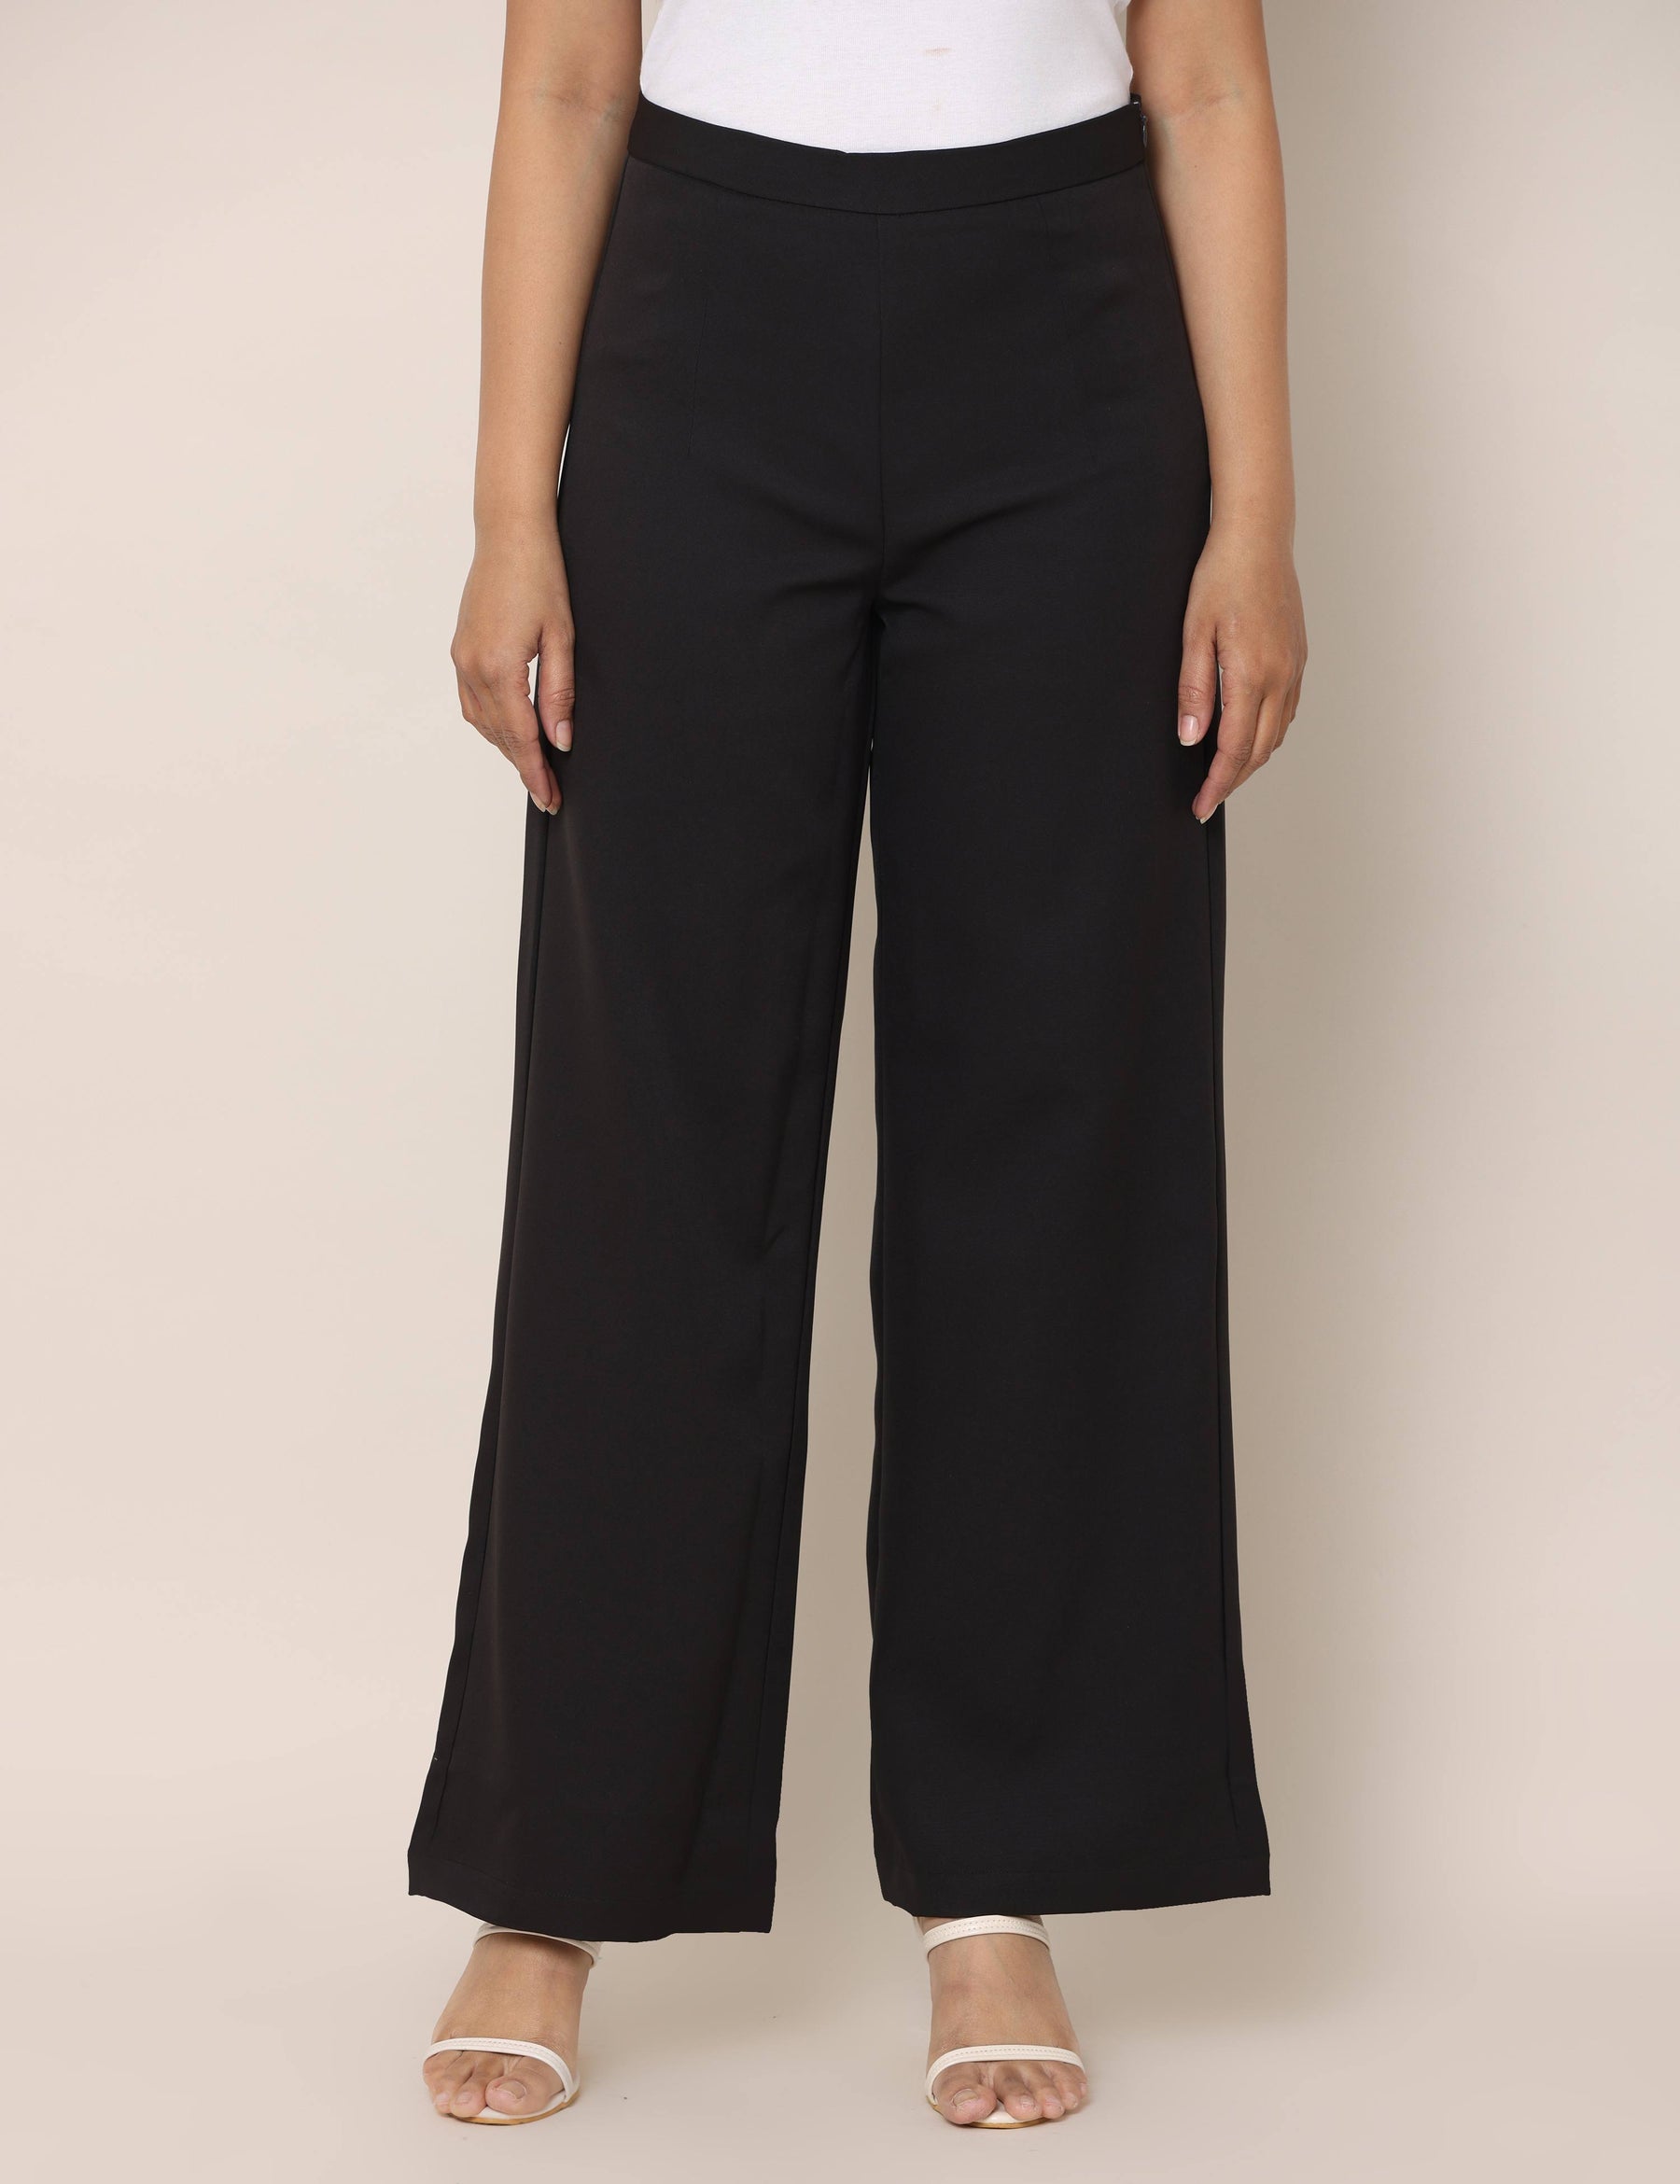 Buy Black Trousers & Pants for Women by Outryt Online | Ajio.com